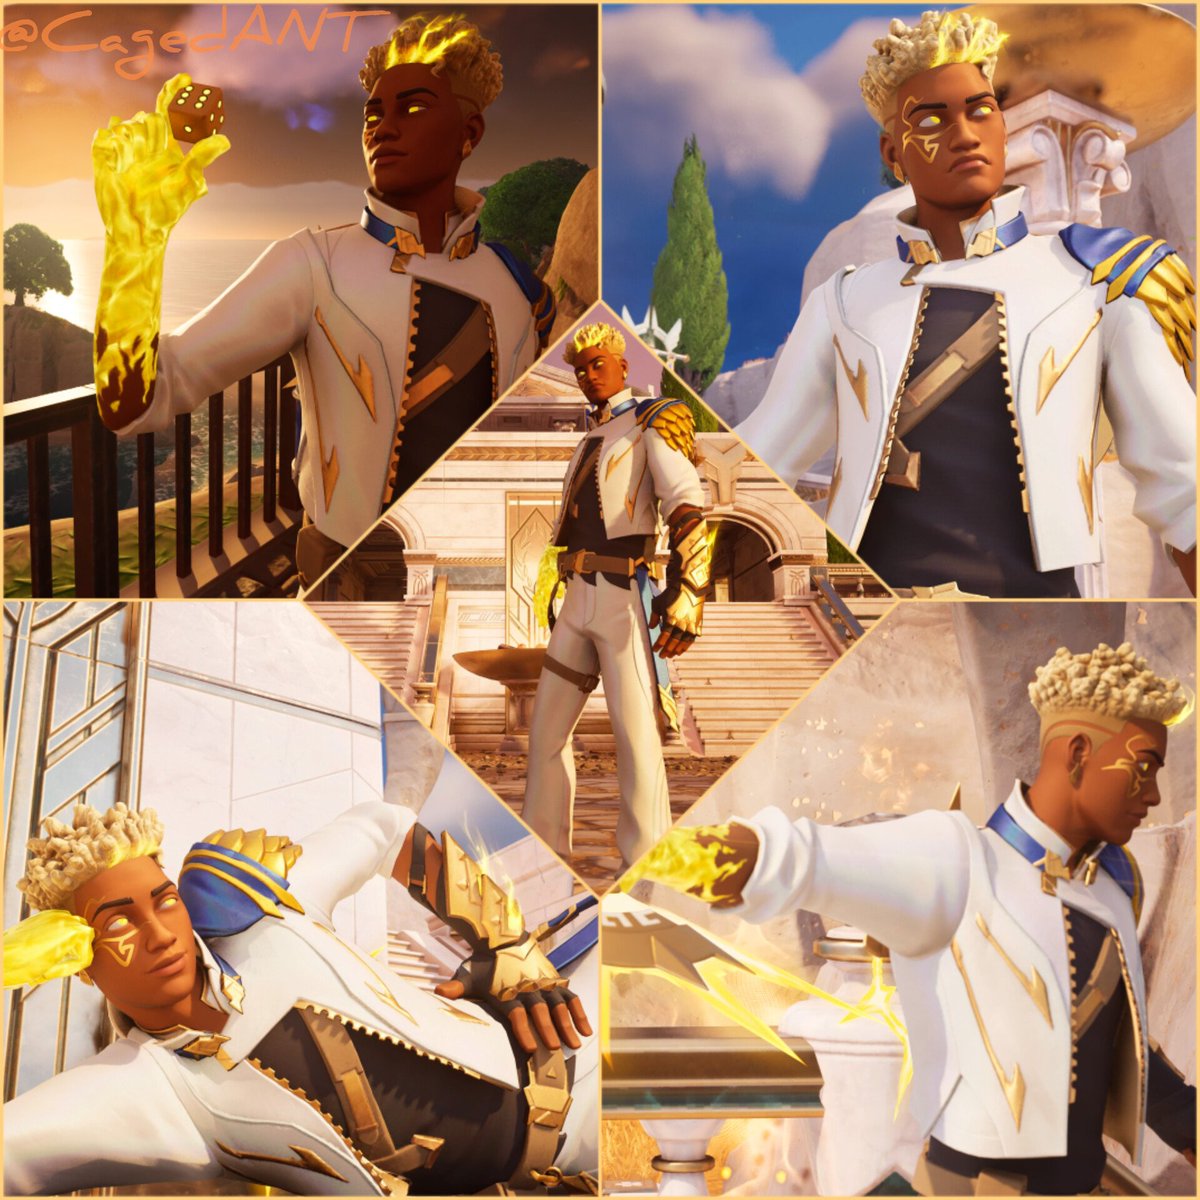 Apollo ☀️ The God of the sun has arrived! Individual shots down below ⬇️
Tags:#Fortnite #Fortography #FortniteChapter5 #FortniteMythsandMortals